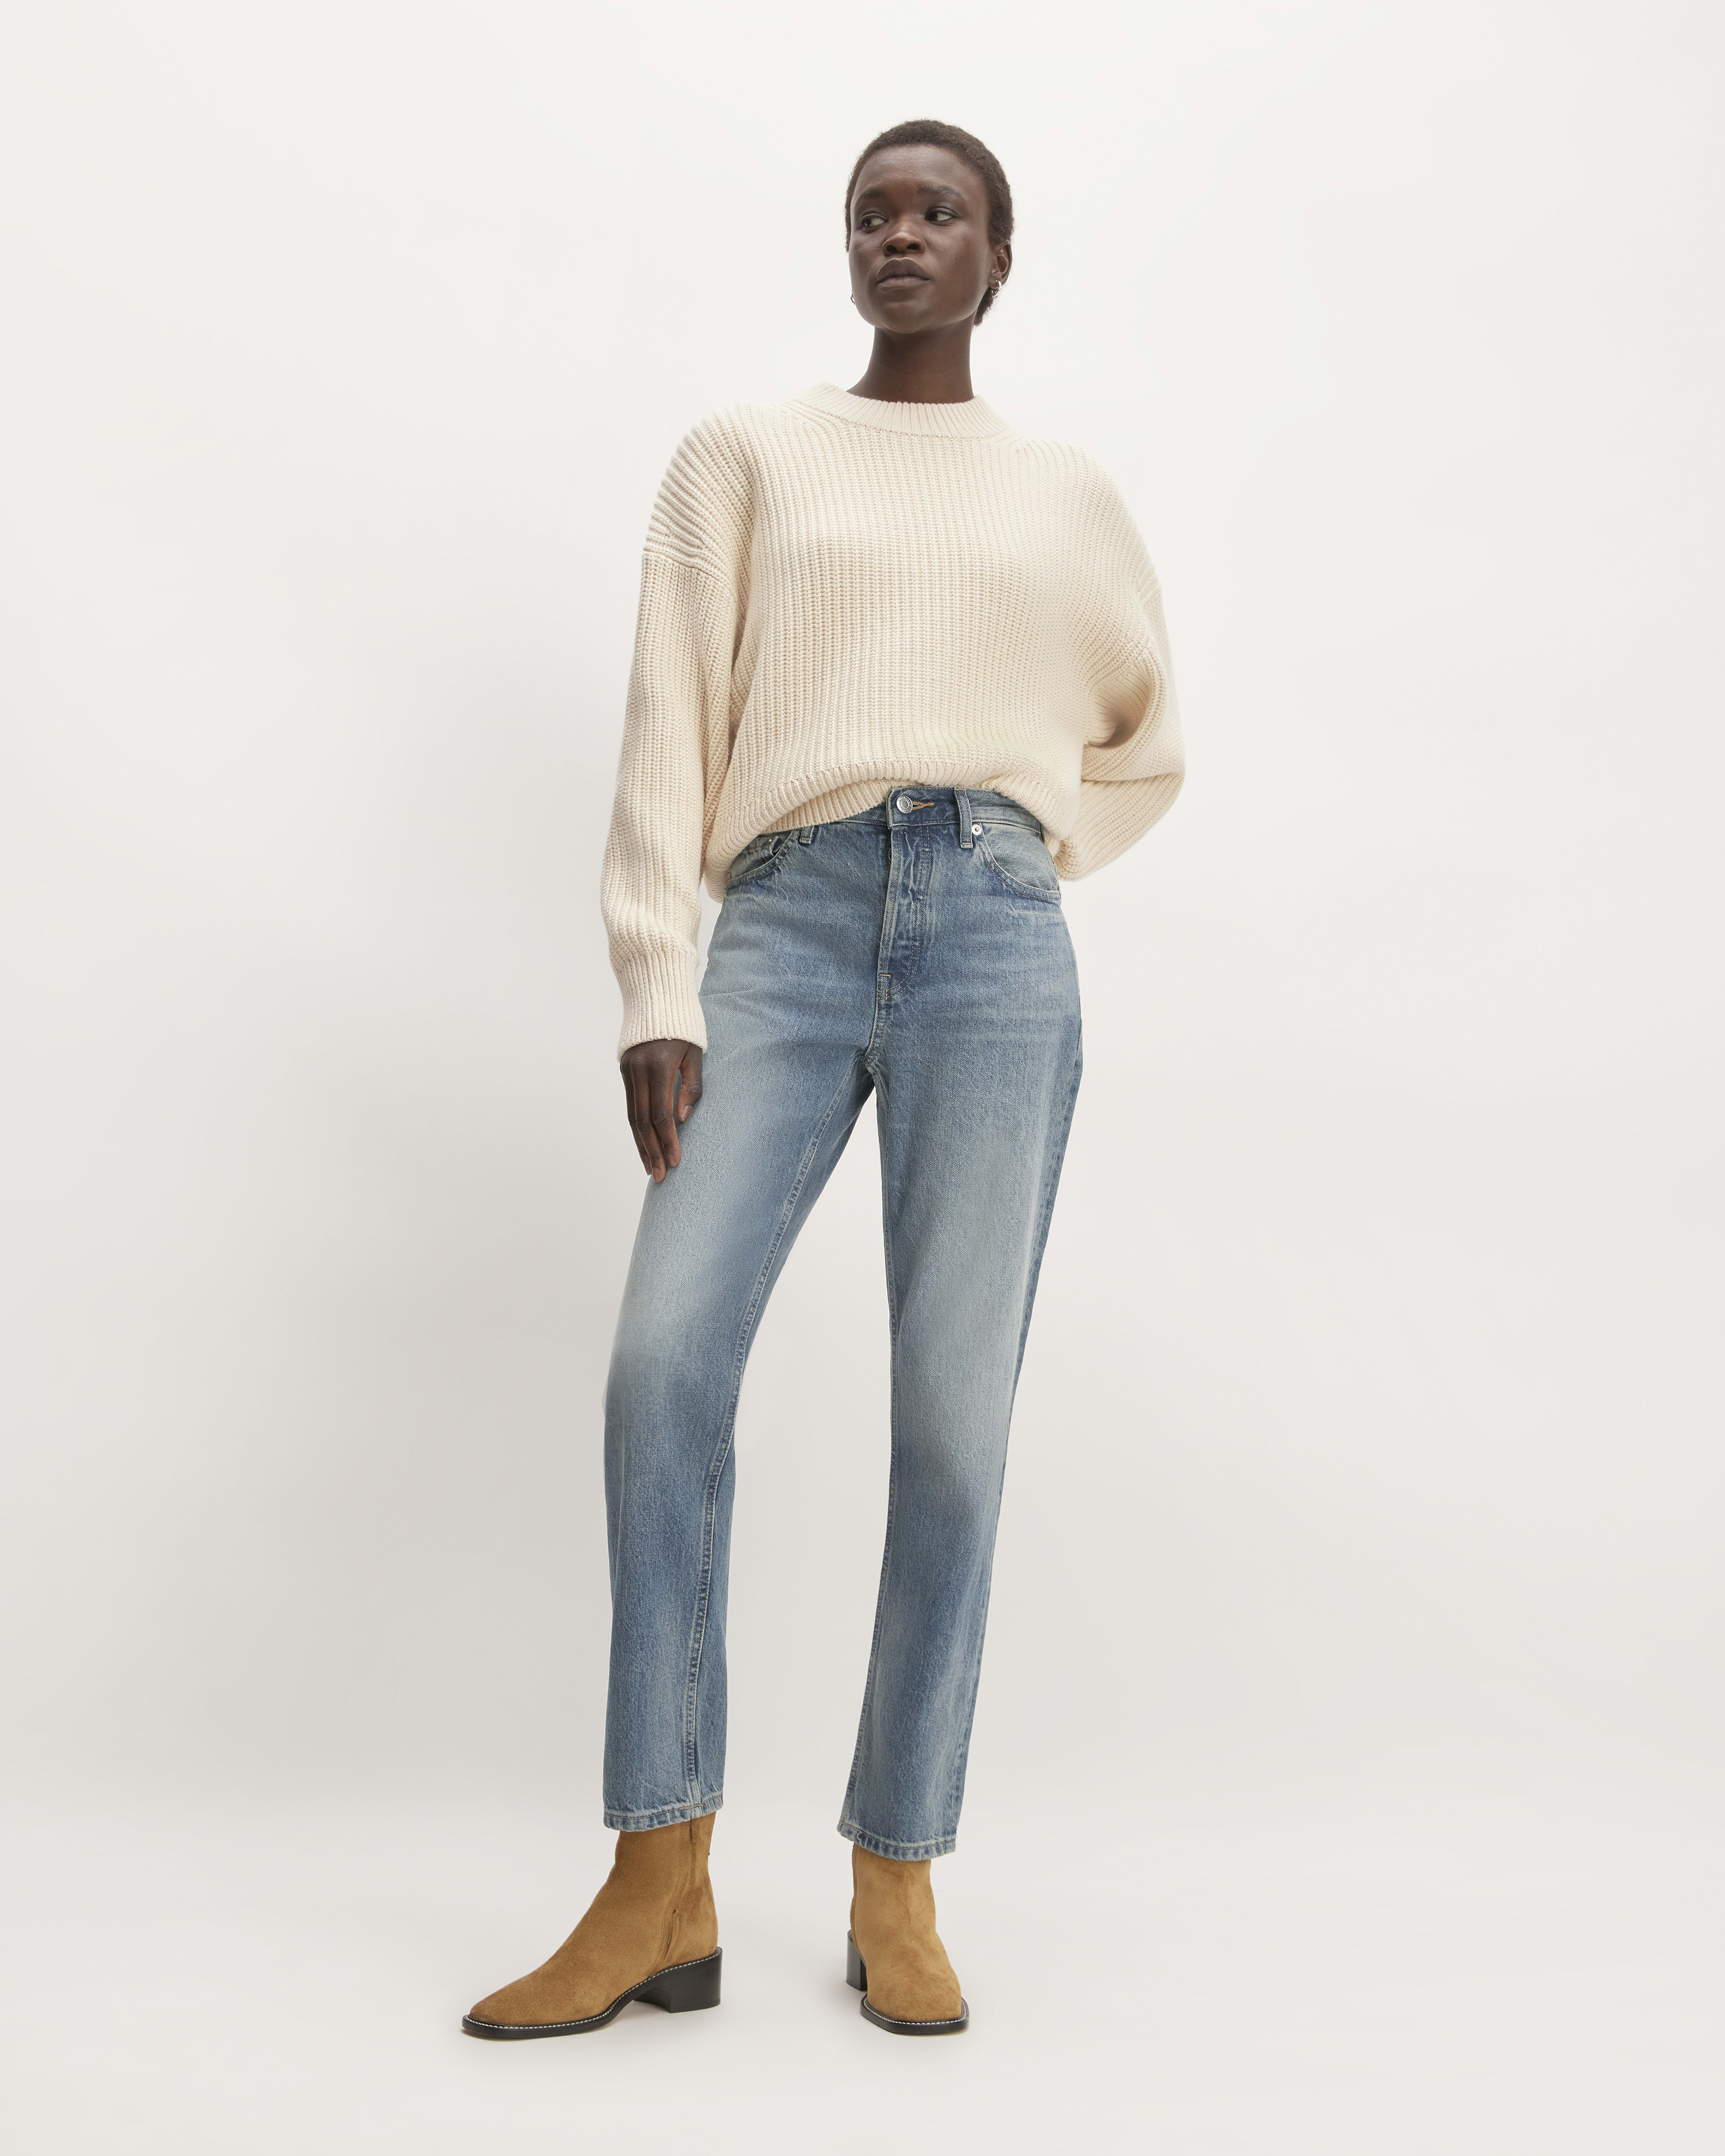 Everlane Pants Review: Why a BAZAAR Editor Loves Everlane Pants